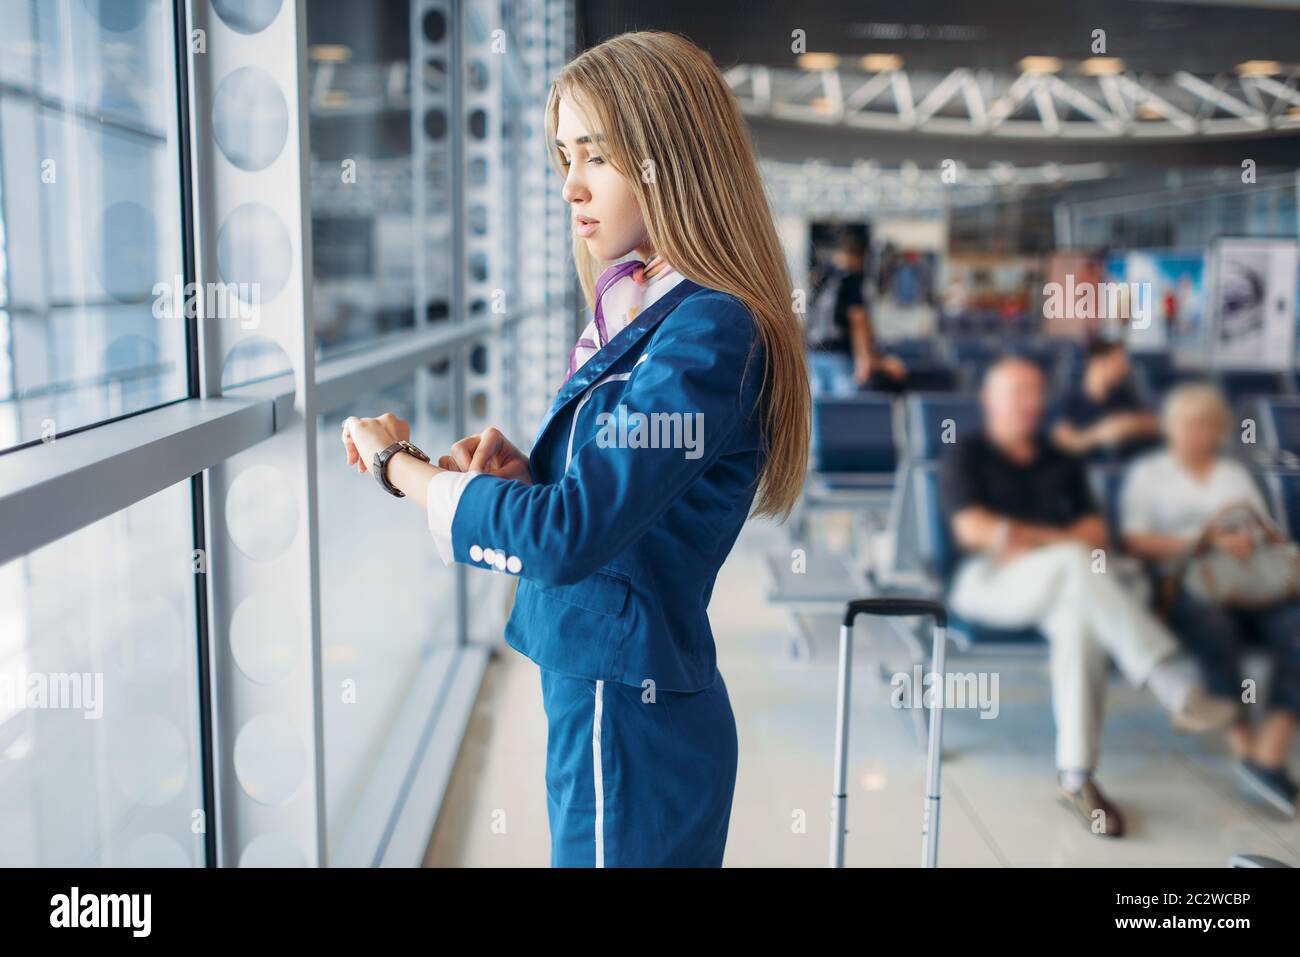 Stewardess legs and suitcase in airport hall. Air hostess with baggage, flight attendant with hand luggage, aviatransportations job Stock Photo